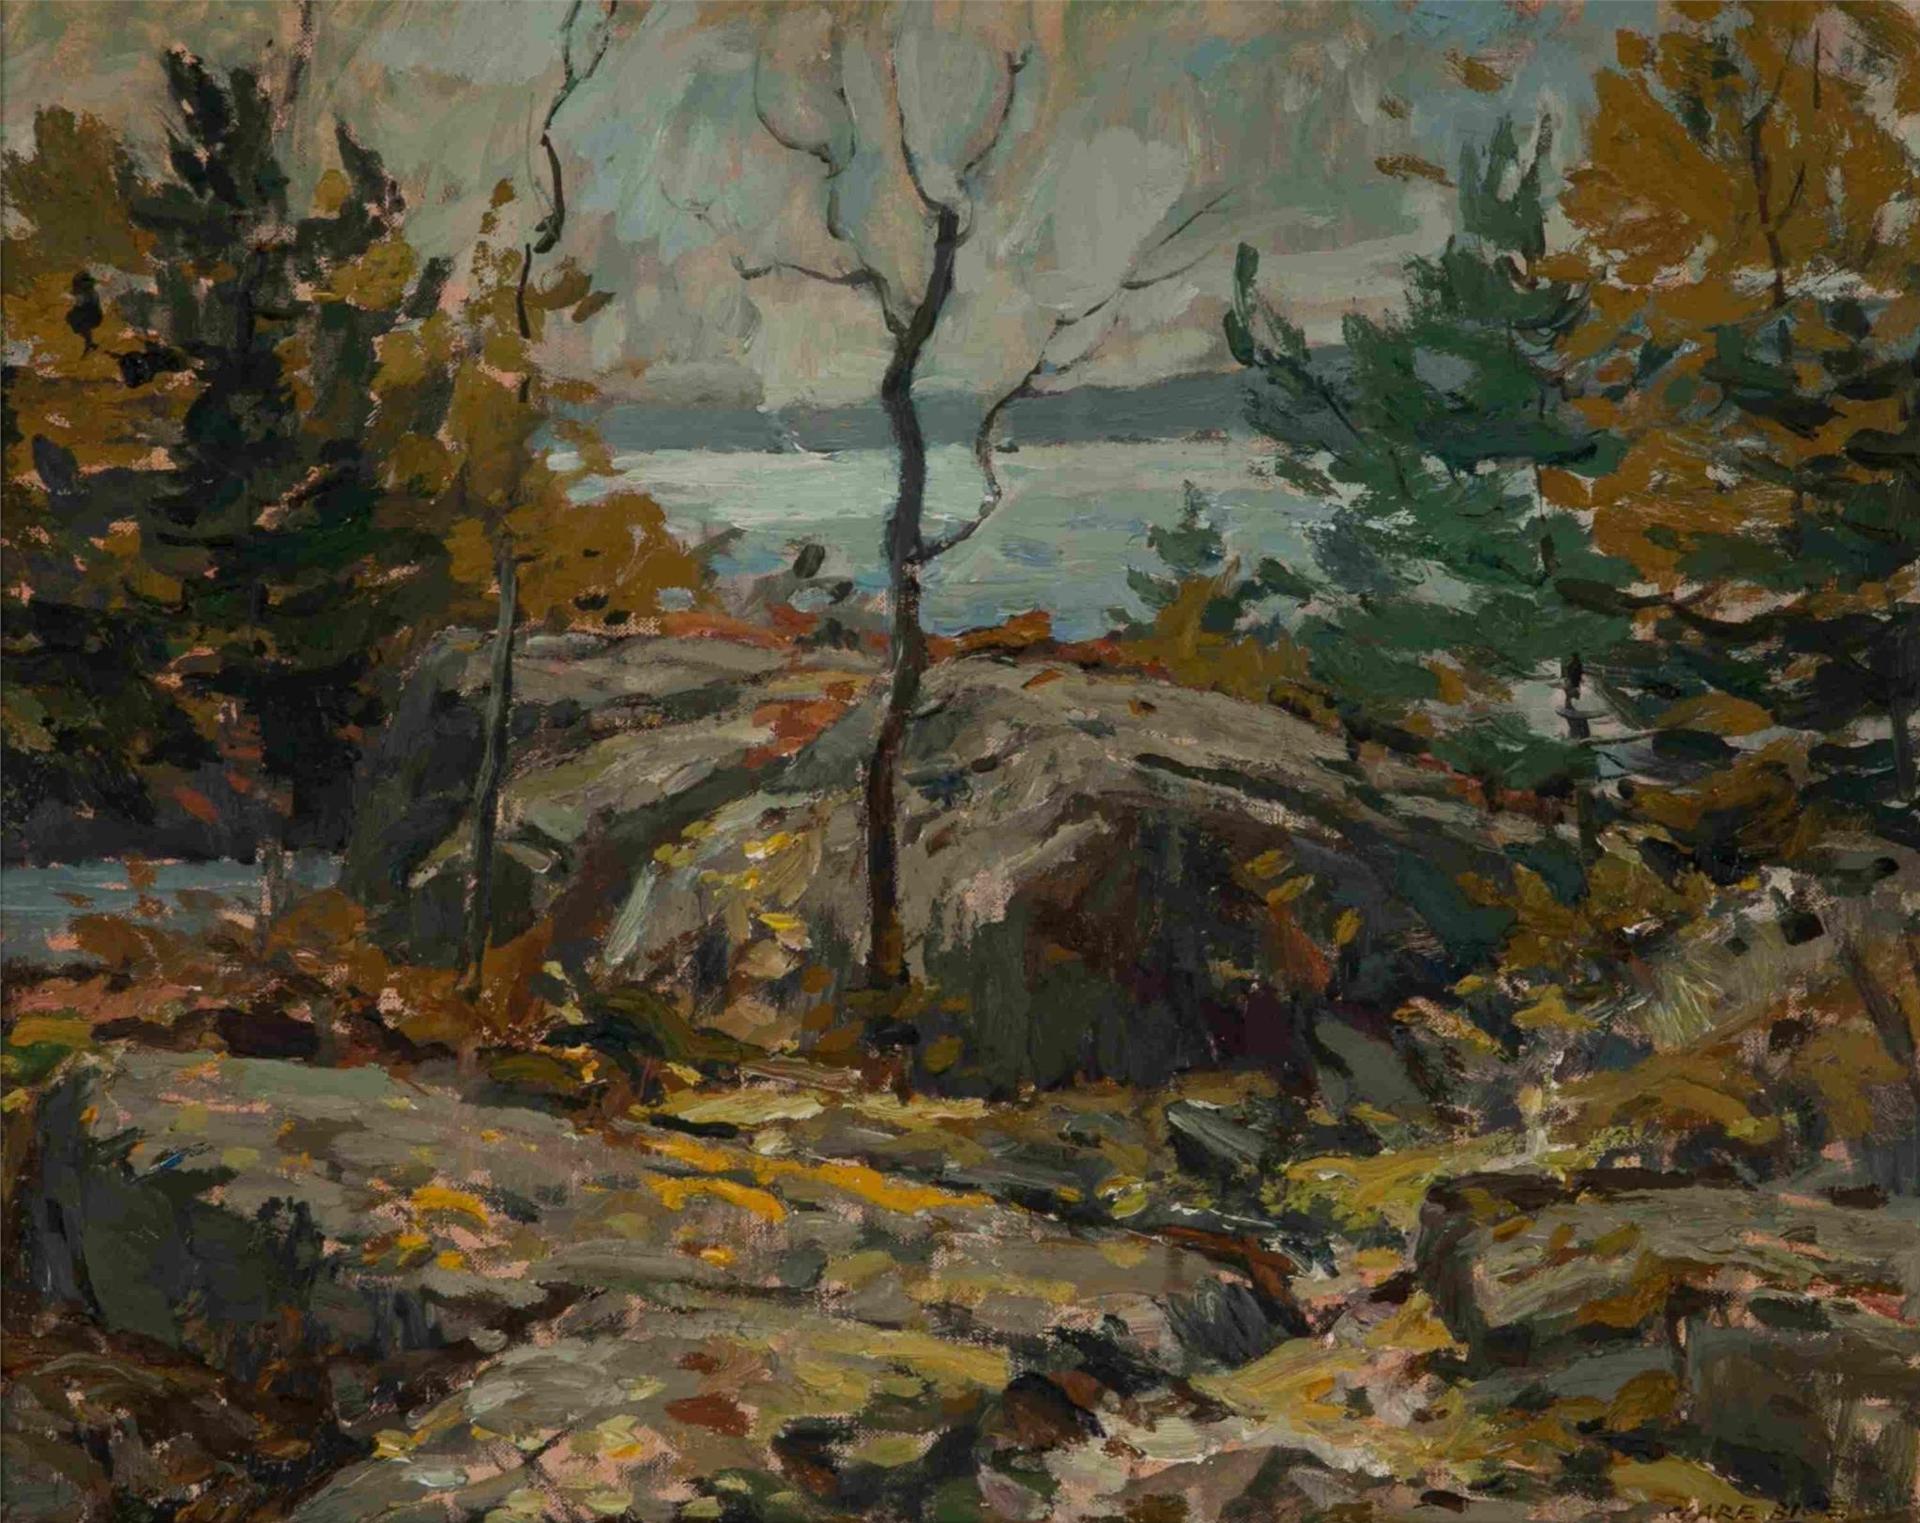 Clare Bice (1909-1976) - The Deer Trail, Papineau Lake, Near Combermere, East of Algonquin